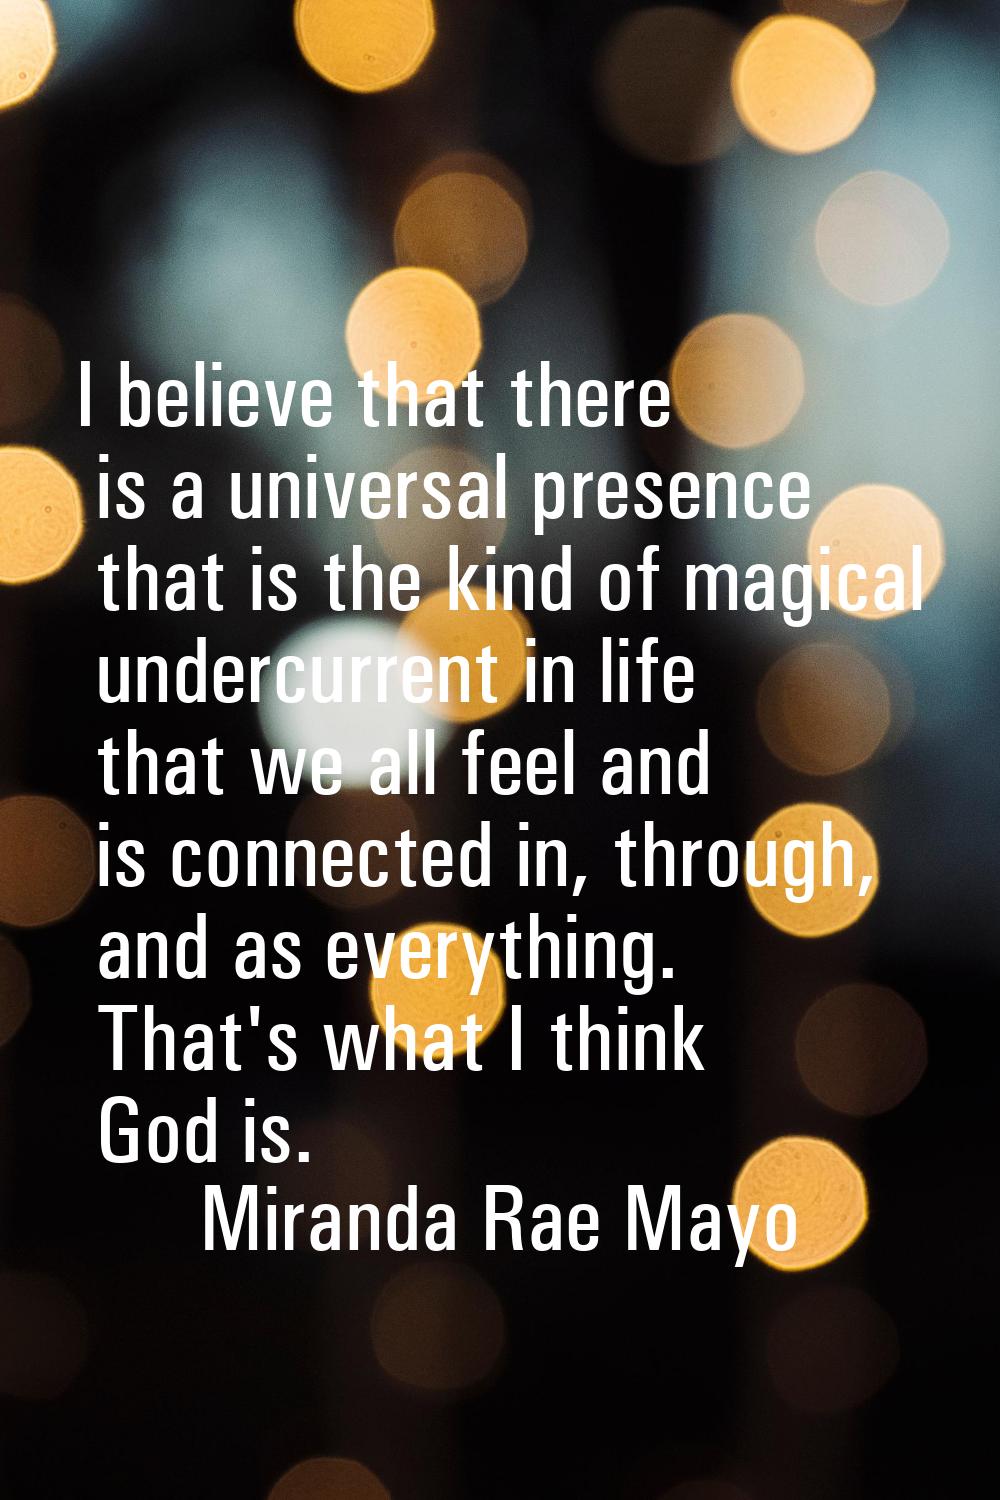 I believe that there is a universal presence that is the kind of magical undercurrent in life that 